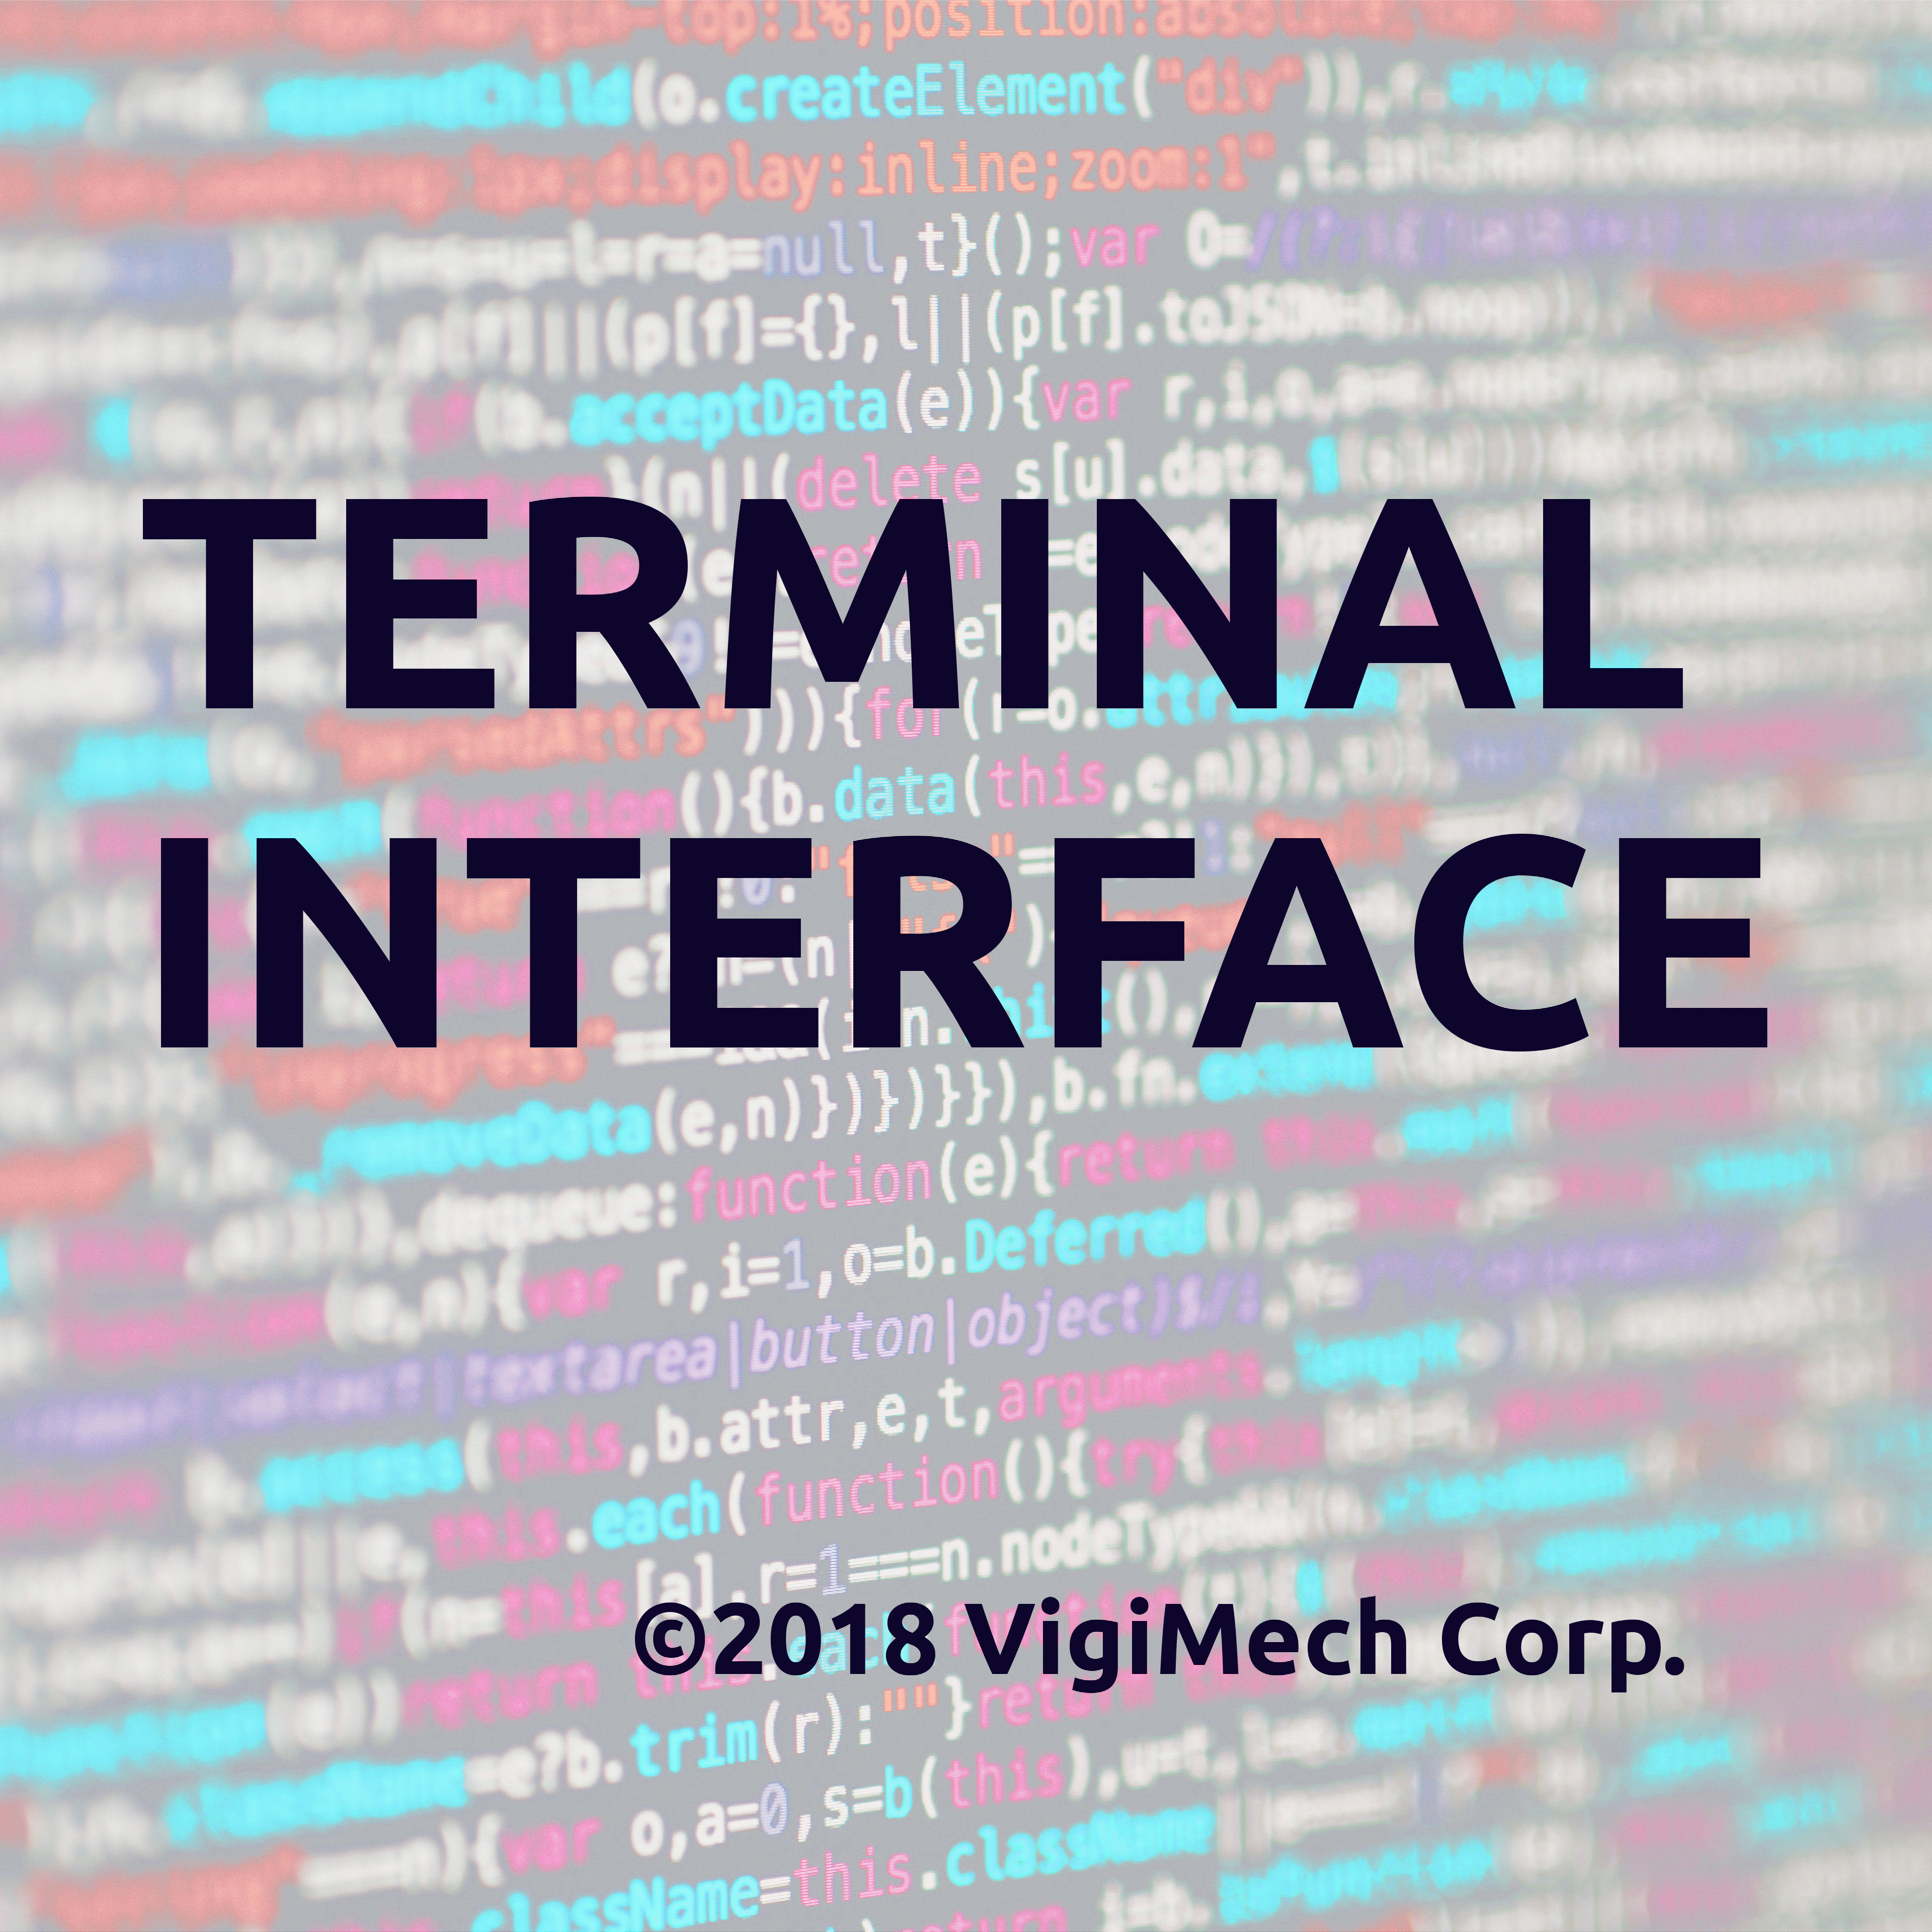 Cover art for Terminal Interface for Models RCM301-303